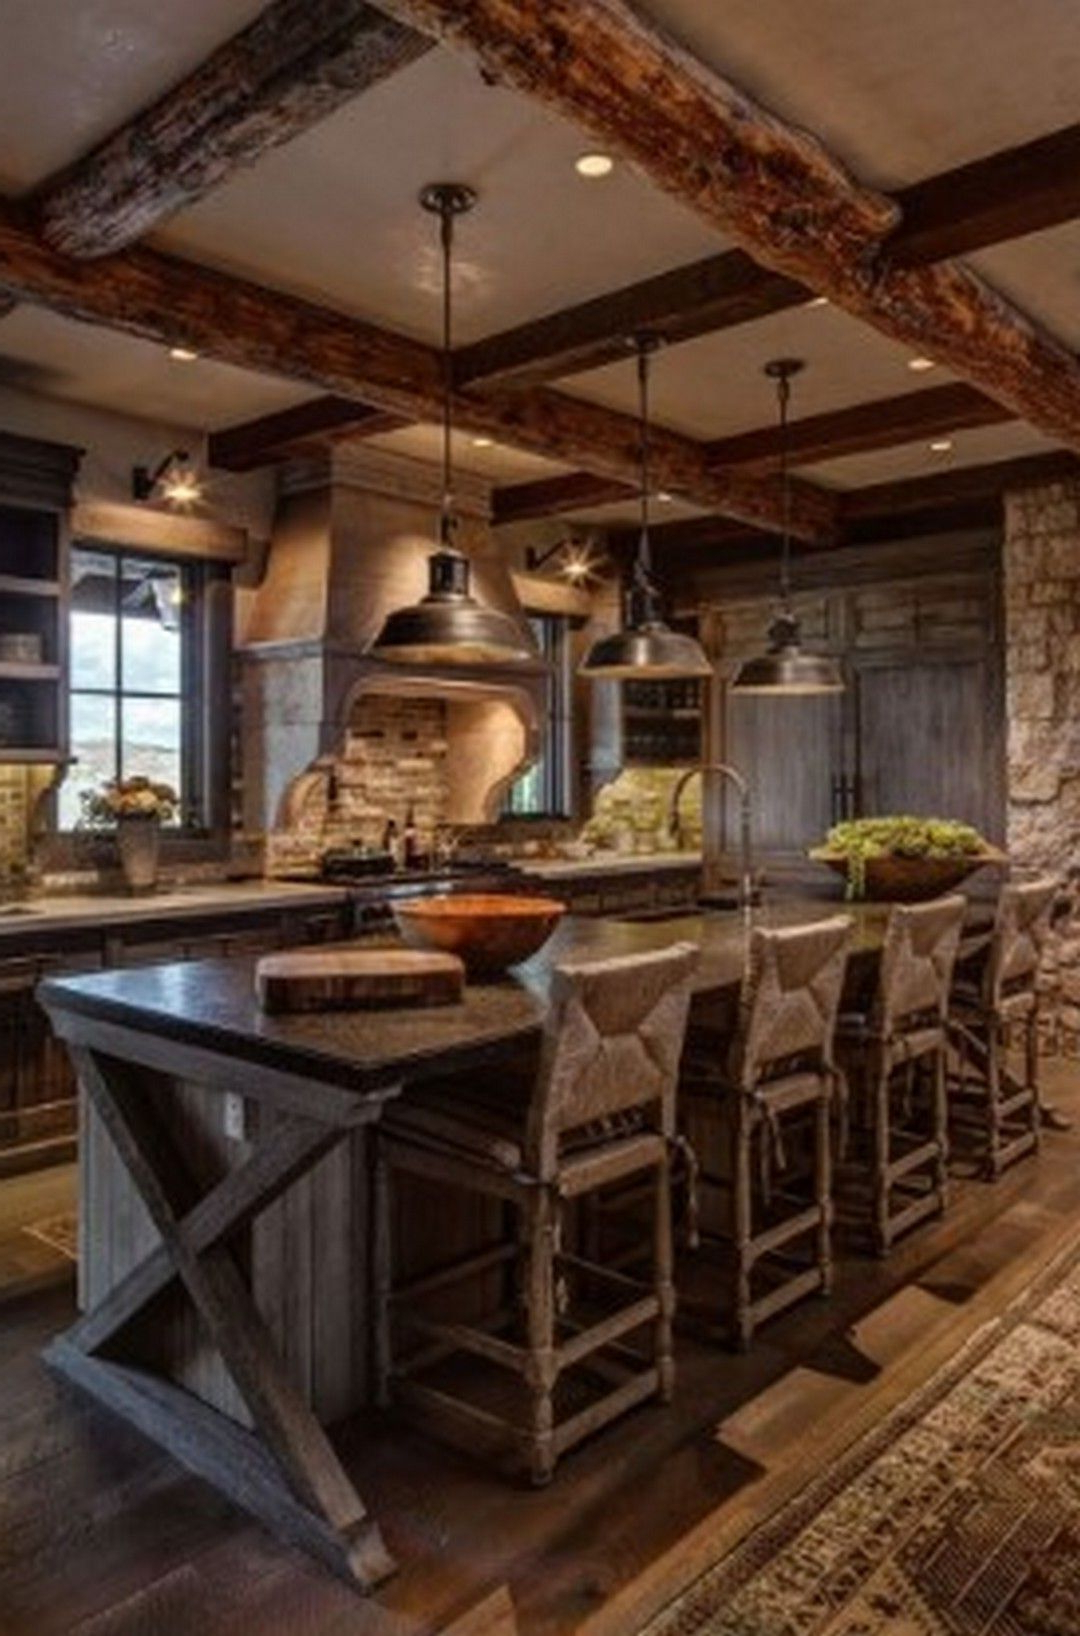 6 Fabulous Rustic Lighting Ideas To Give Your Home Look